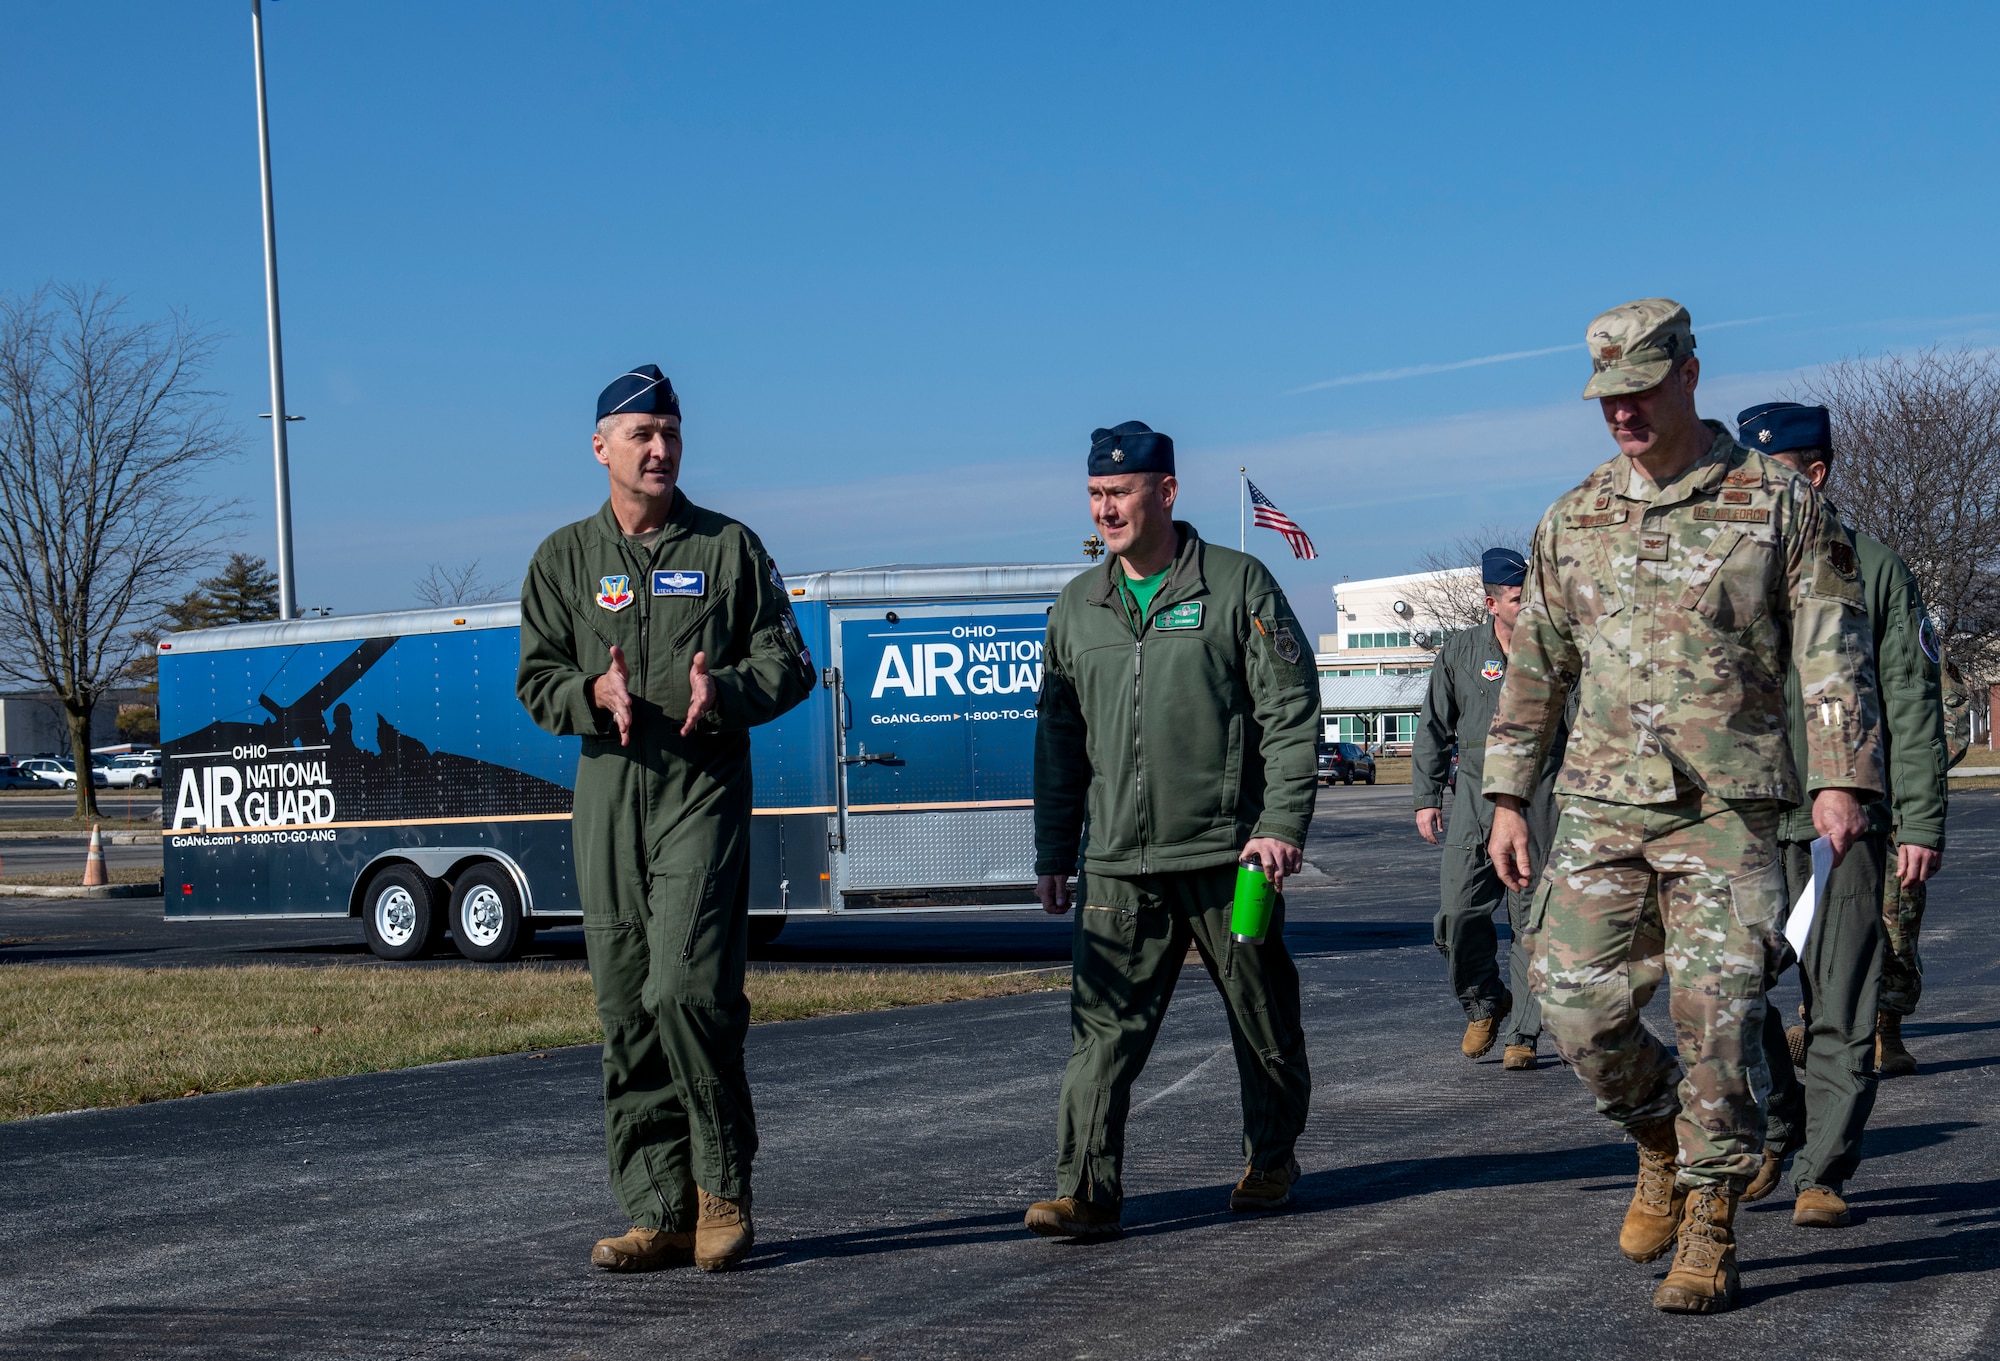 U.S. Air Force Lt. Gen. Steven S. Nordhaus, Continental U.S. NORAD Region commander, speaks with Col. Chad Holesko, commander of the Ohio National Guard’s 180th Fighter Wing and Lt. Col. Curtis Voltz, the 180FW operations group commander, during a visit to the 180FW in Swanton, Ohio, Feb. 1, 2024. Nordhaus, who commanded the 180FW from 2011 to 2013, received a tour of the wing's facilities and discussed the 180FW's role as an Aerospace Control Alert-trained unit during his visit.  (U.S. Air National Guard photo by Airman 1st Class Nicholas Battani)